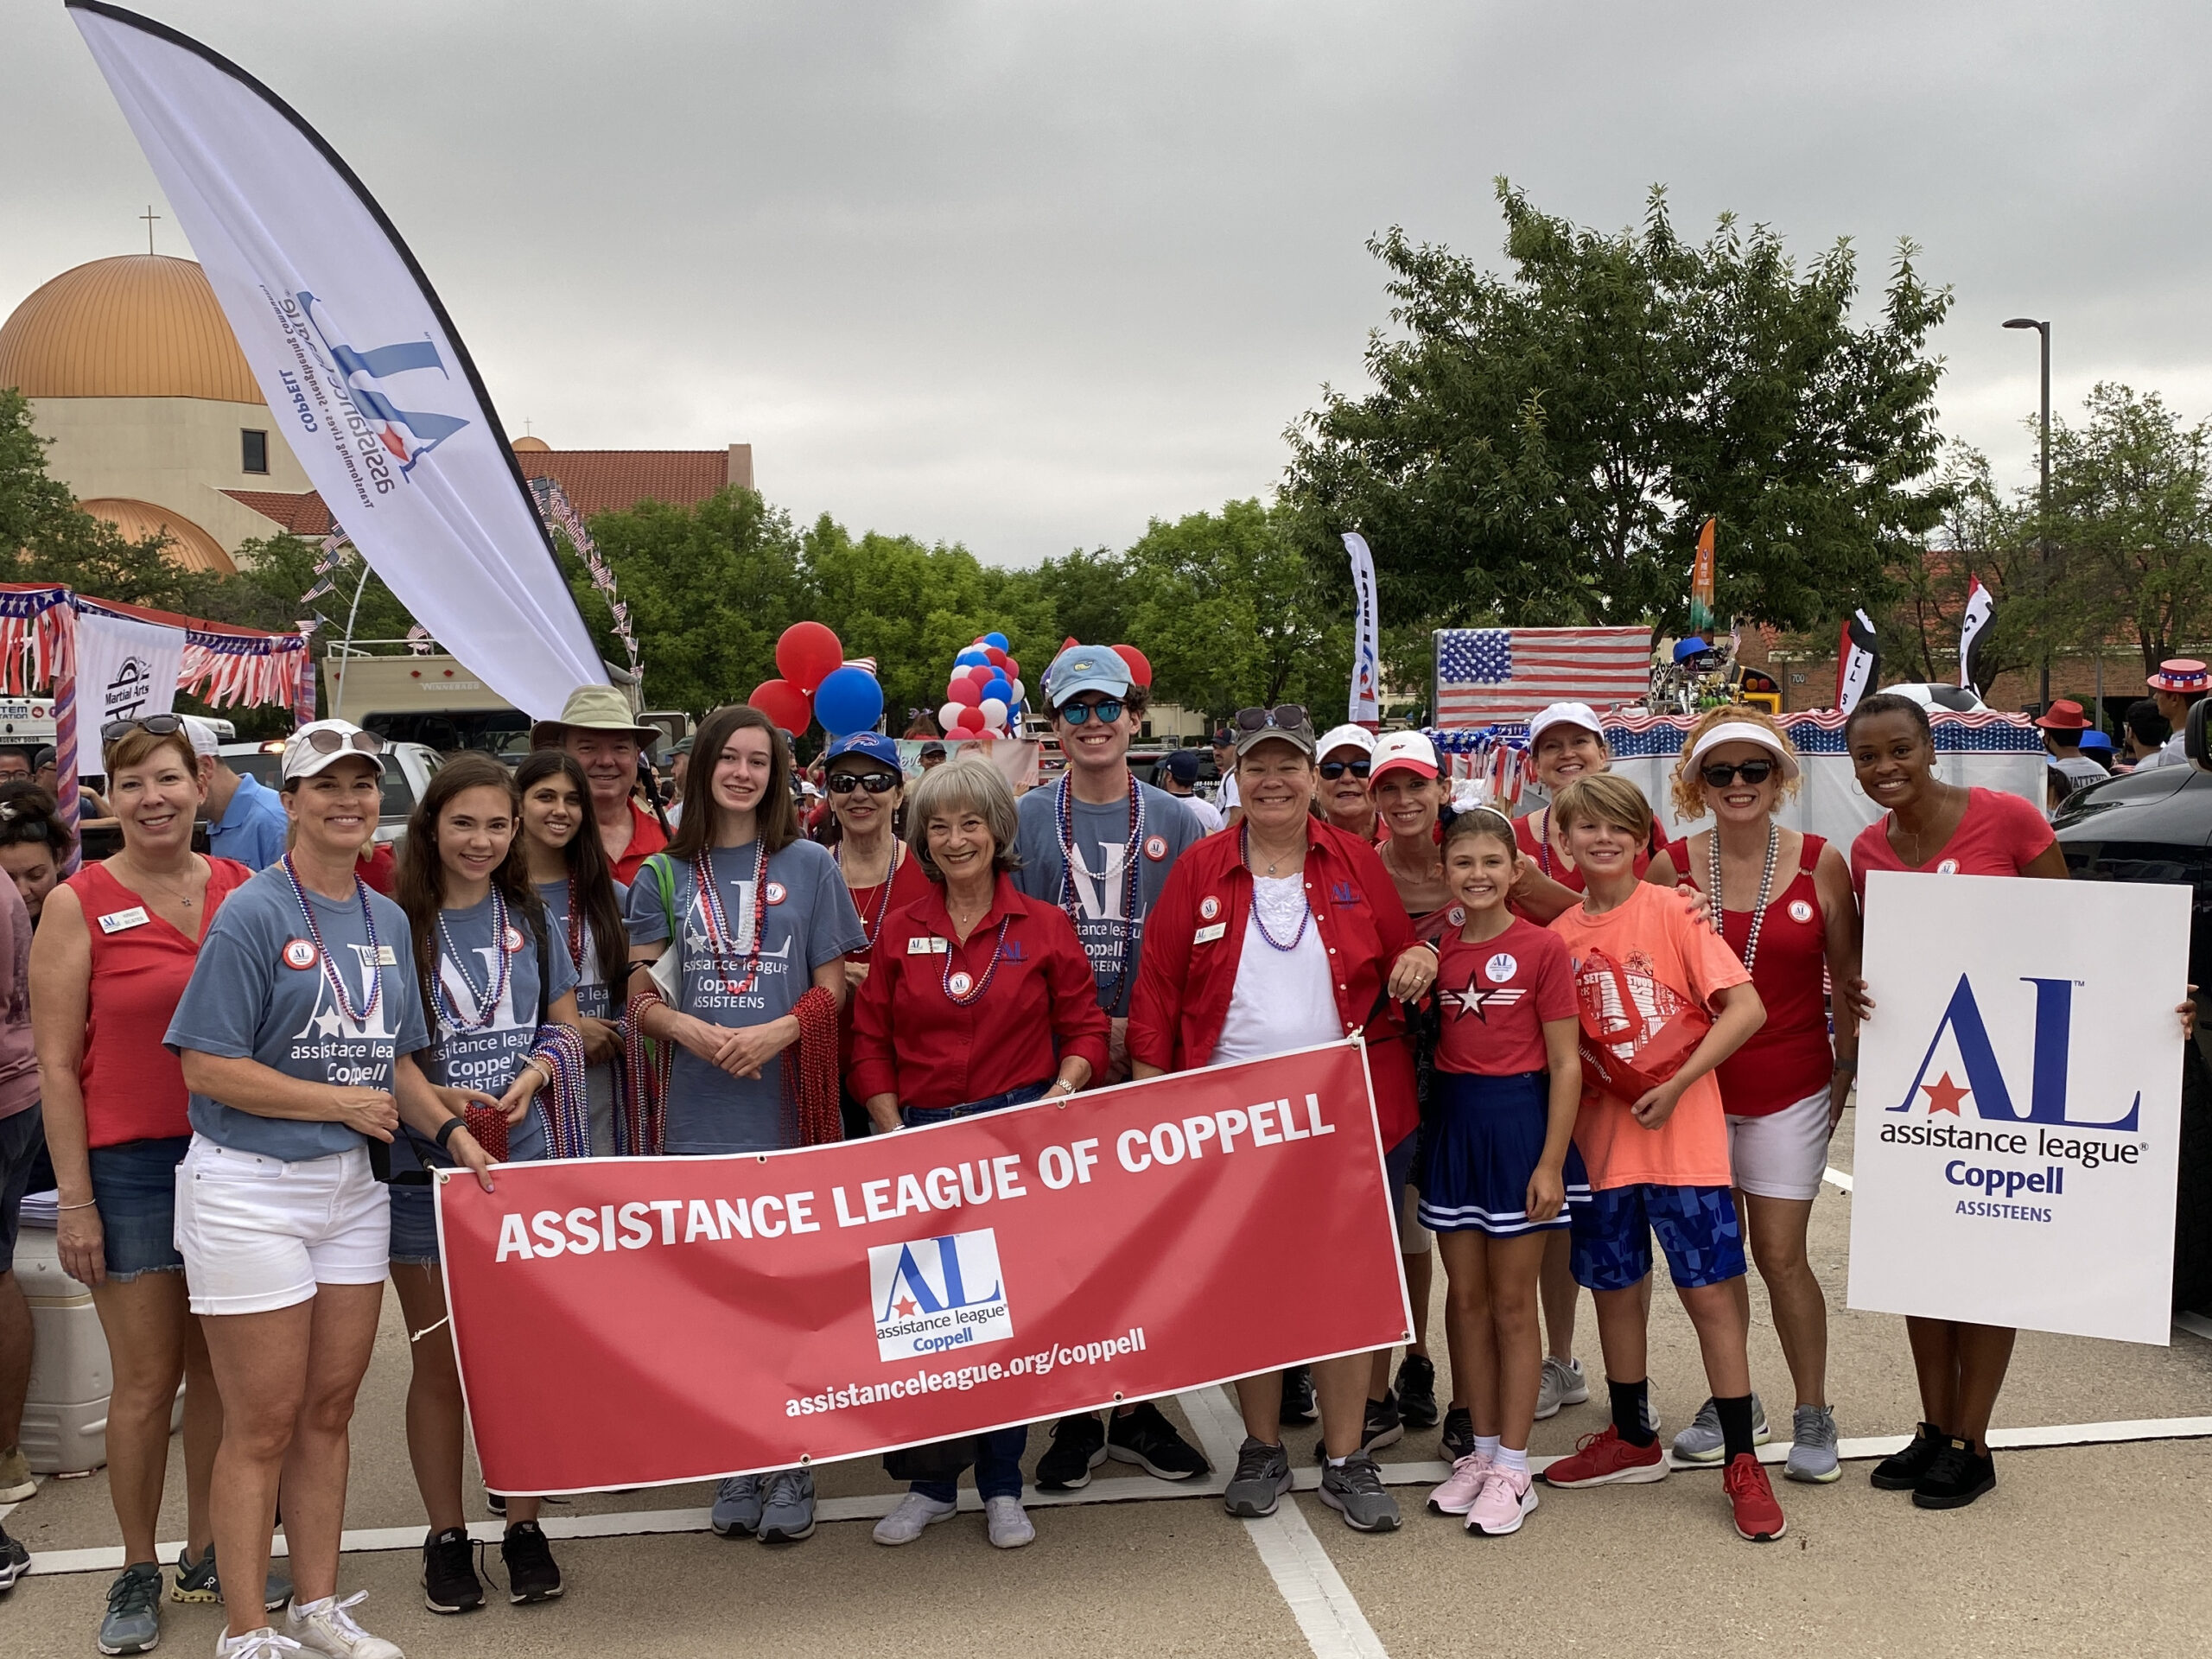 Celebrating At The Coppell Independence Day Parade Assistance League